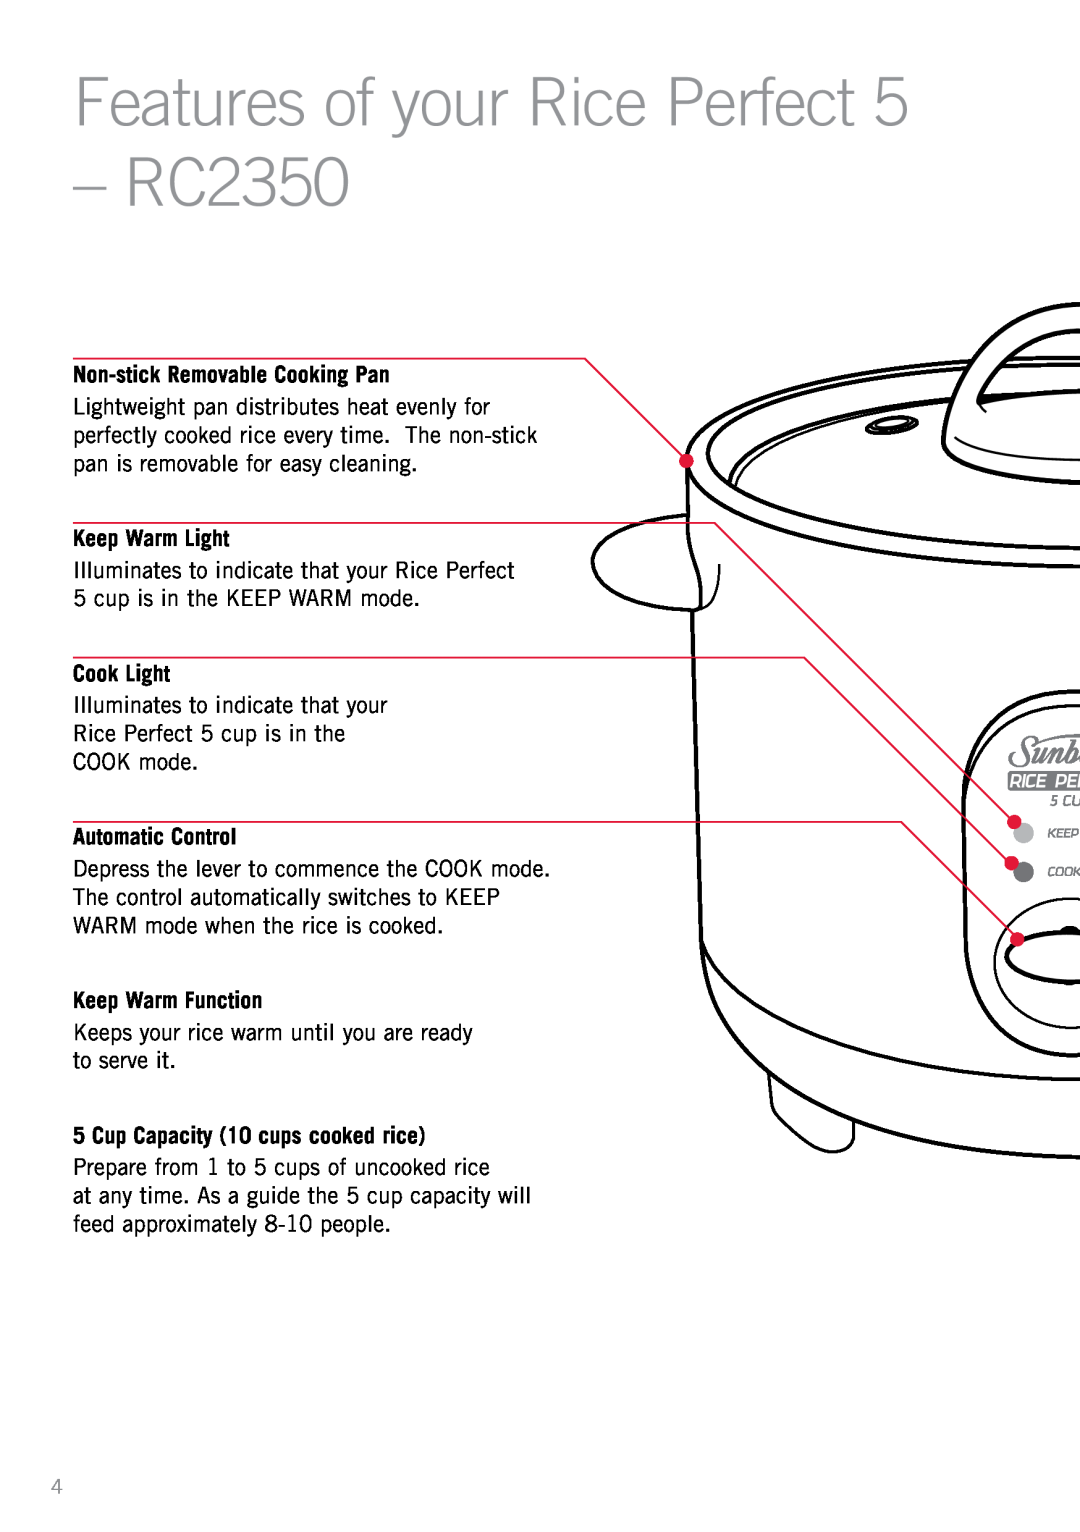 Sunbeam RC2650 Features of your Rice Perfect - RC2350, Non-stickRemovable Cooking Pan, Keep Warm Light, Cook Light 